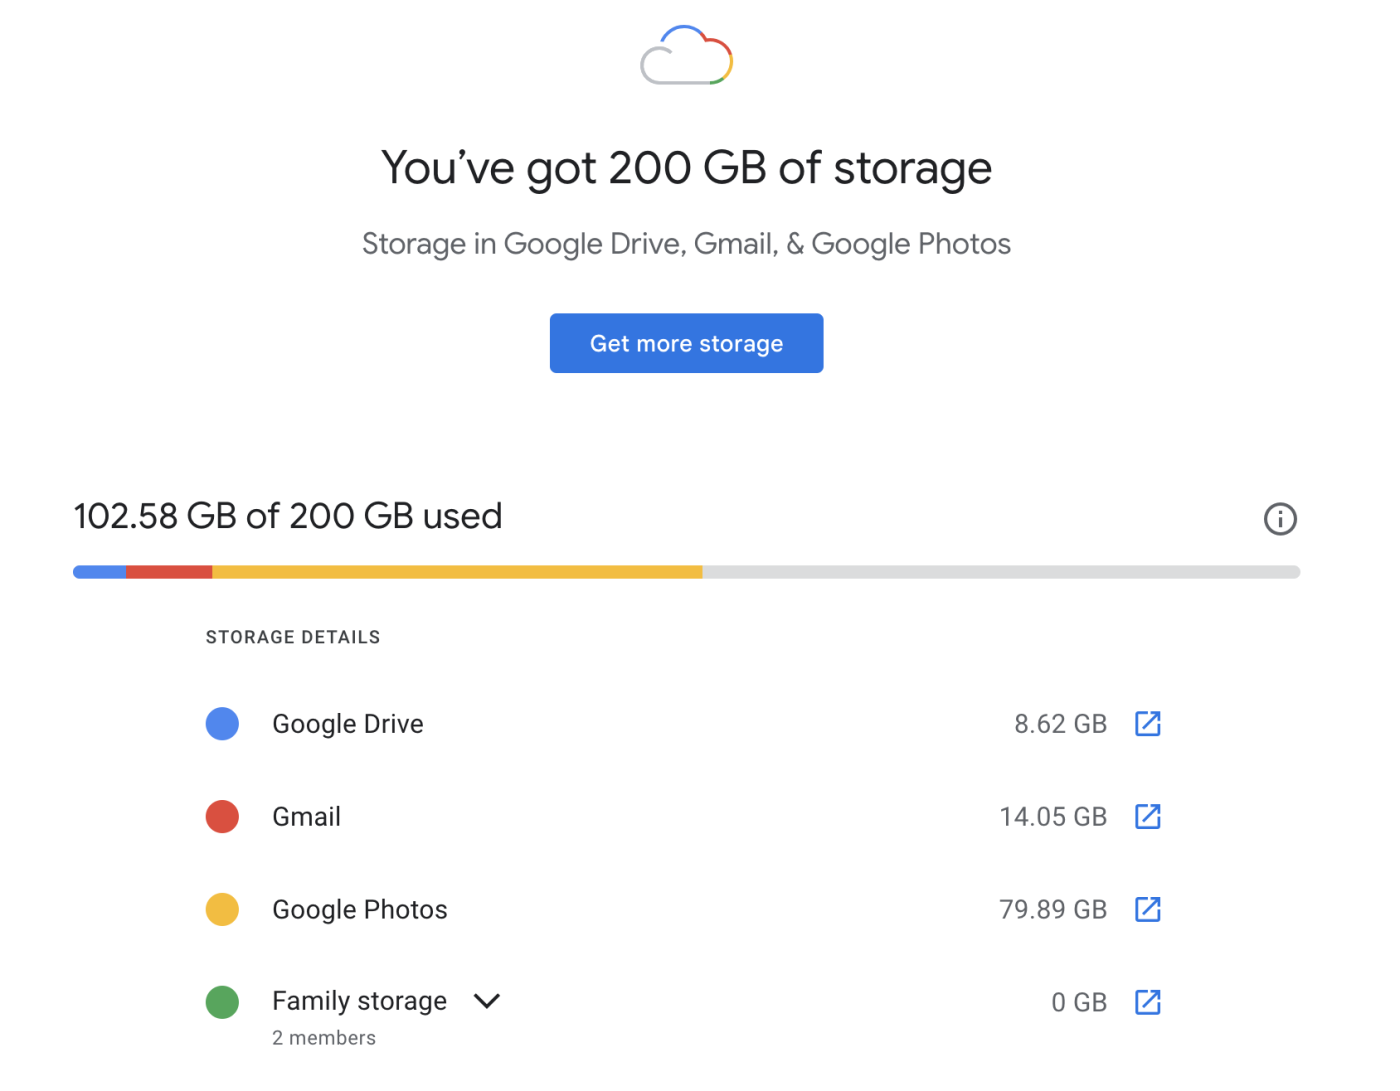 An overview of the amount of storage used across Google apps